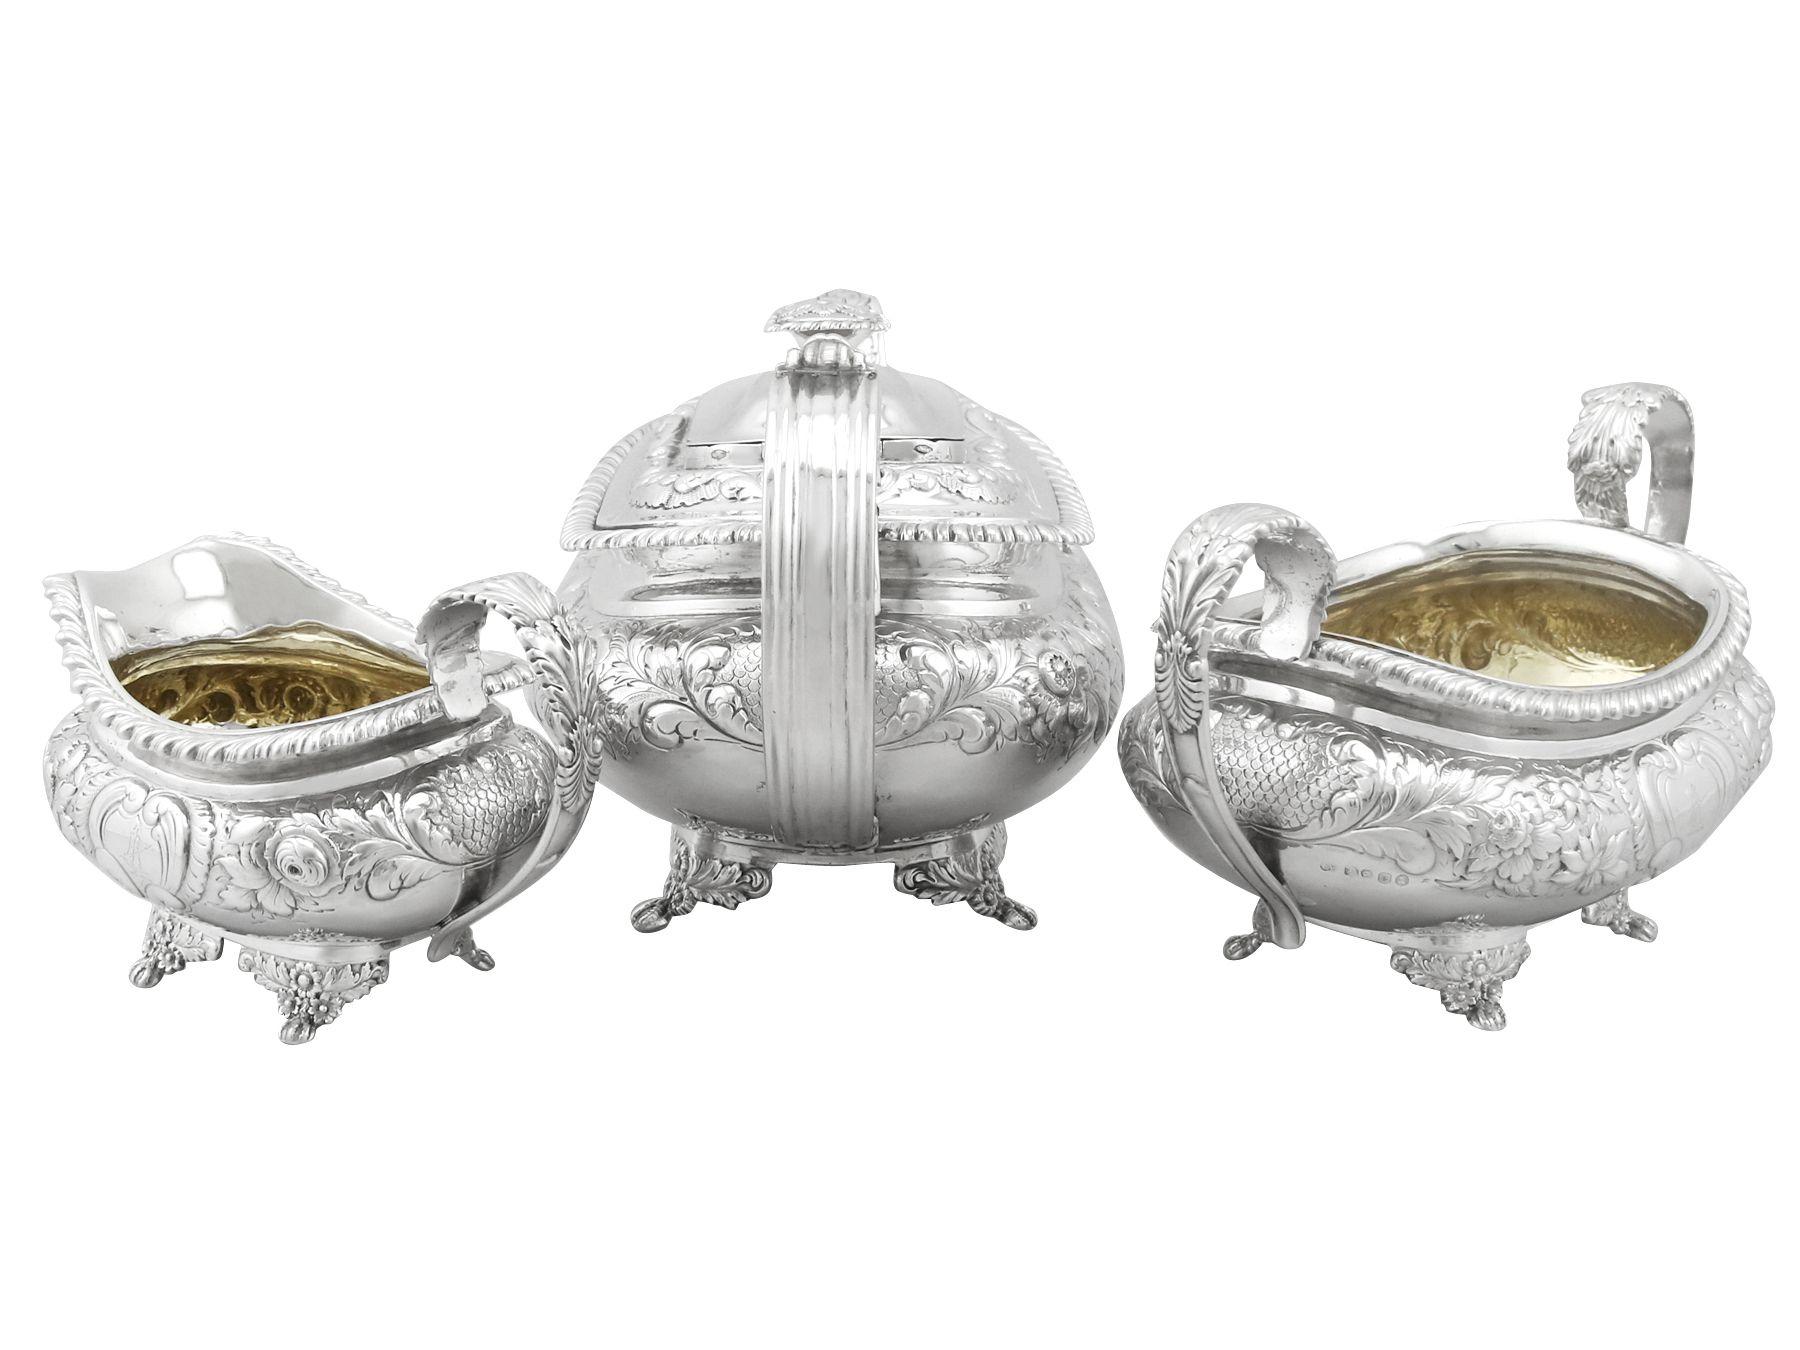 An exceptional, fine antique George IV English sterling silver three piece tea service / set made by Charles Thomas Fox; part of our silver teaware collection

This exceptional antique sterling silver three piece tea service consists of a teapot,